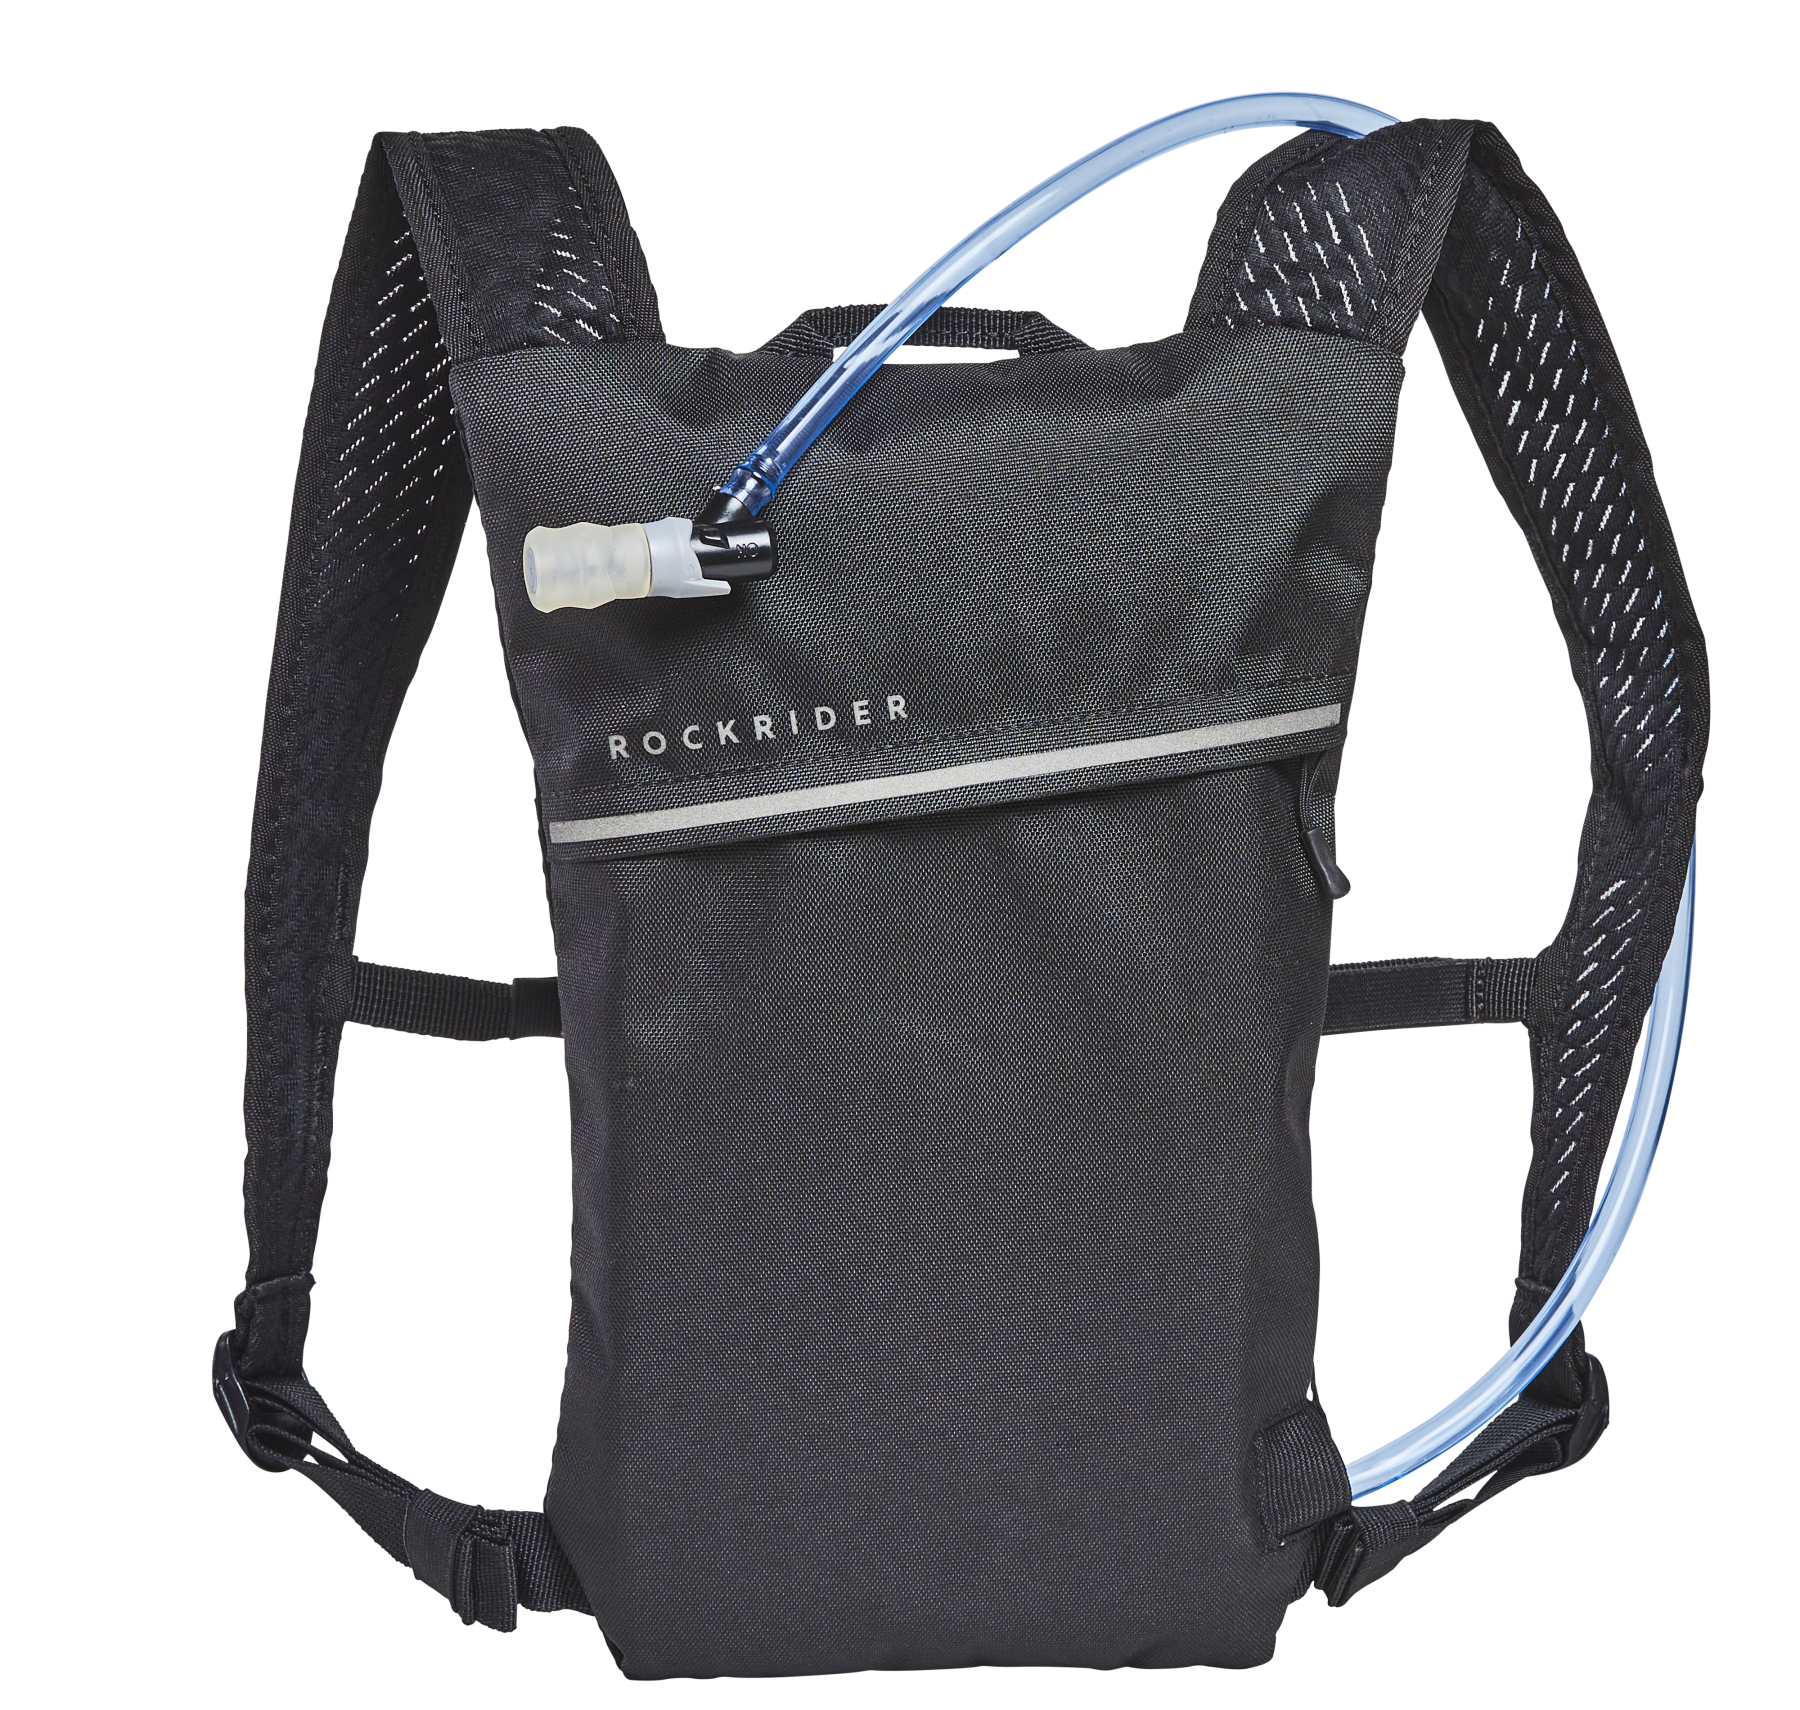 HYDRATION BACKPACK